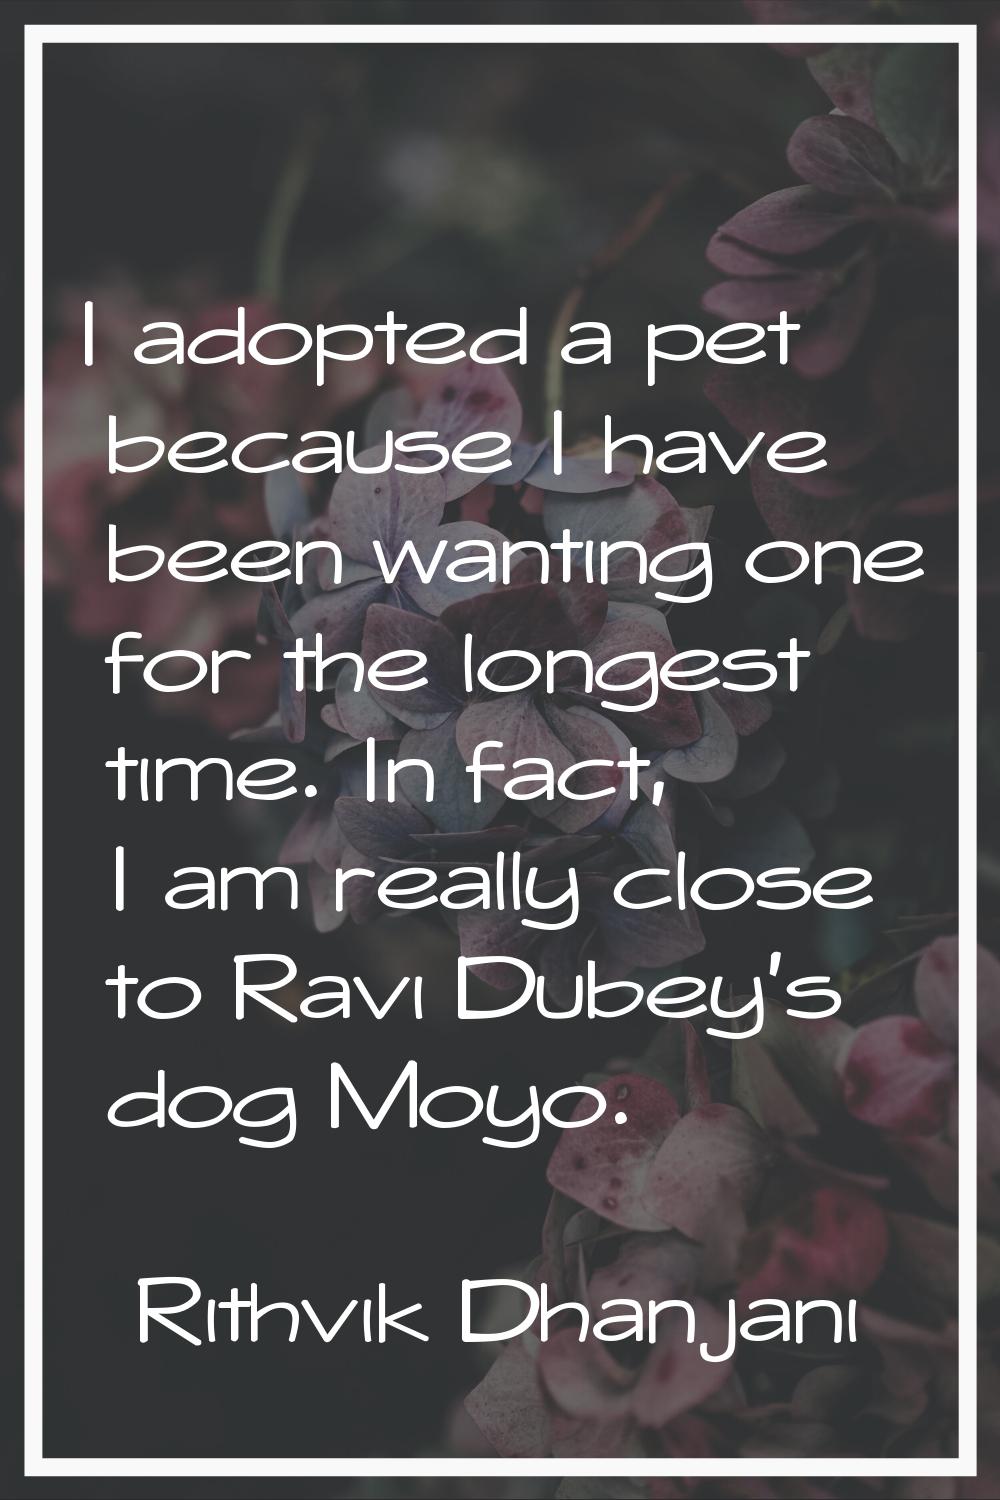 I adopted a pet because I have been wanting one for the longest time. In fact, I am really close to